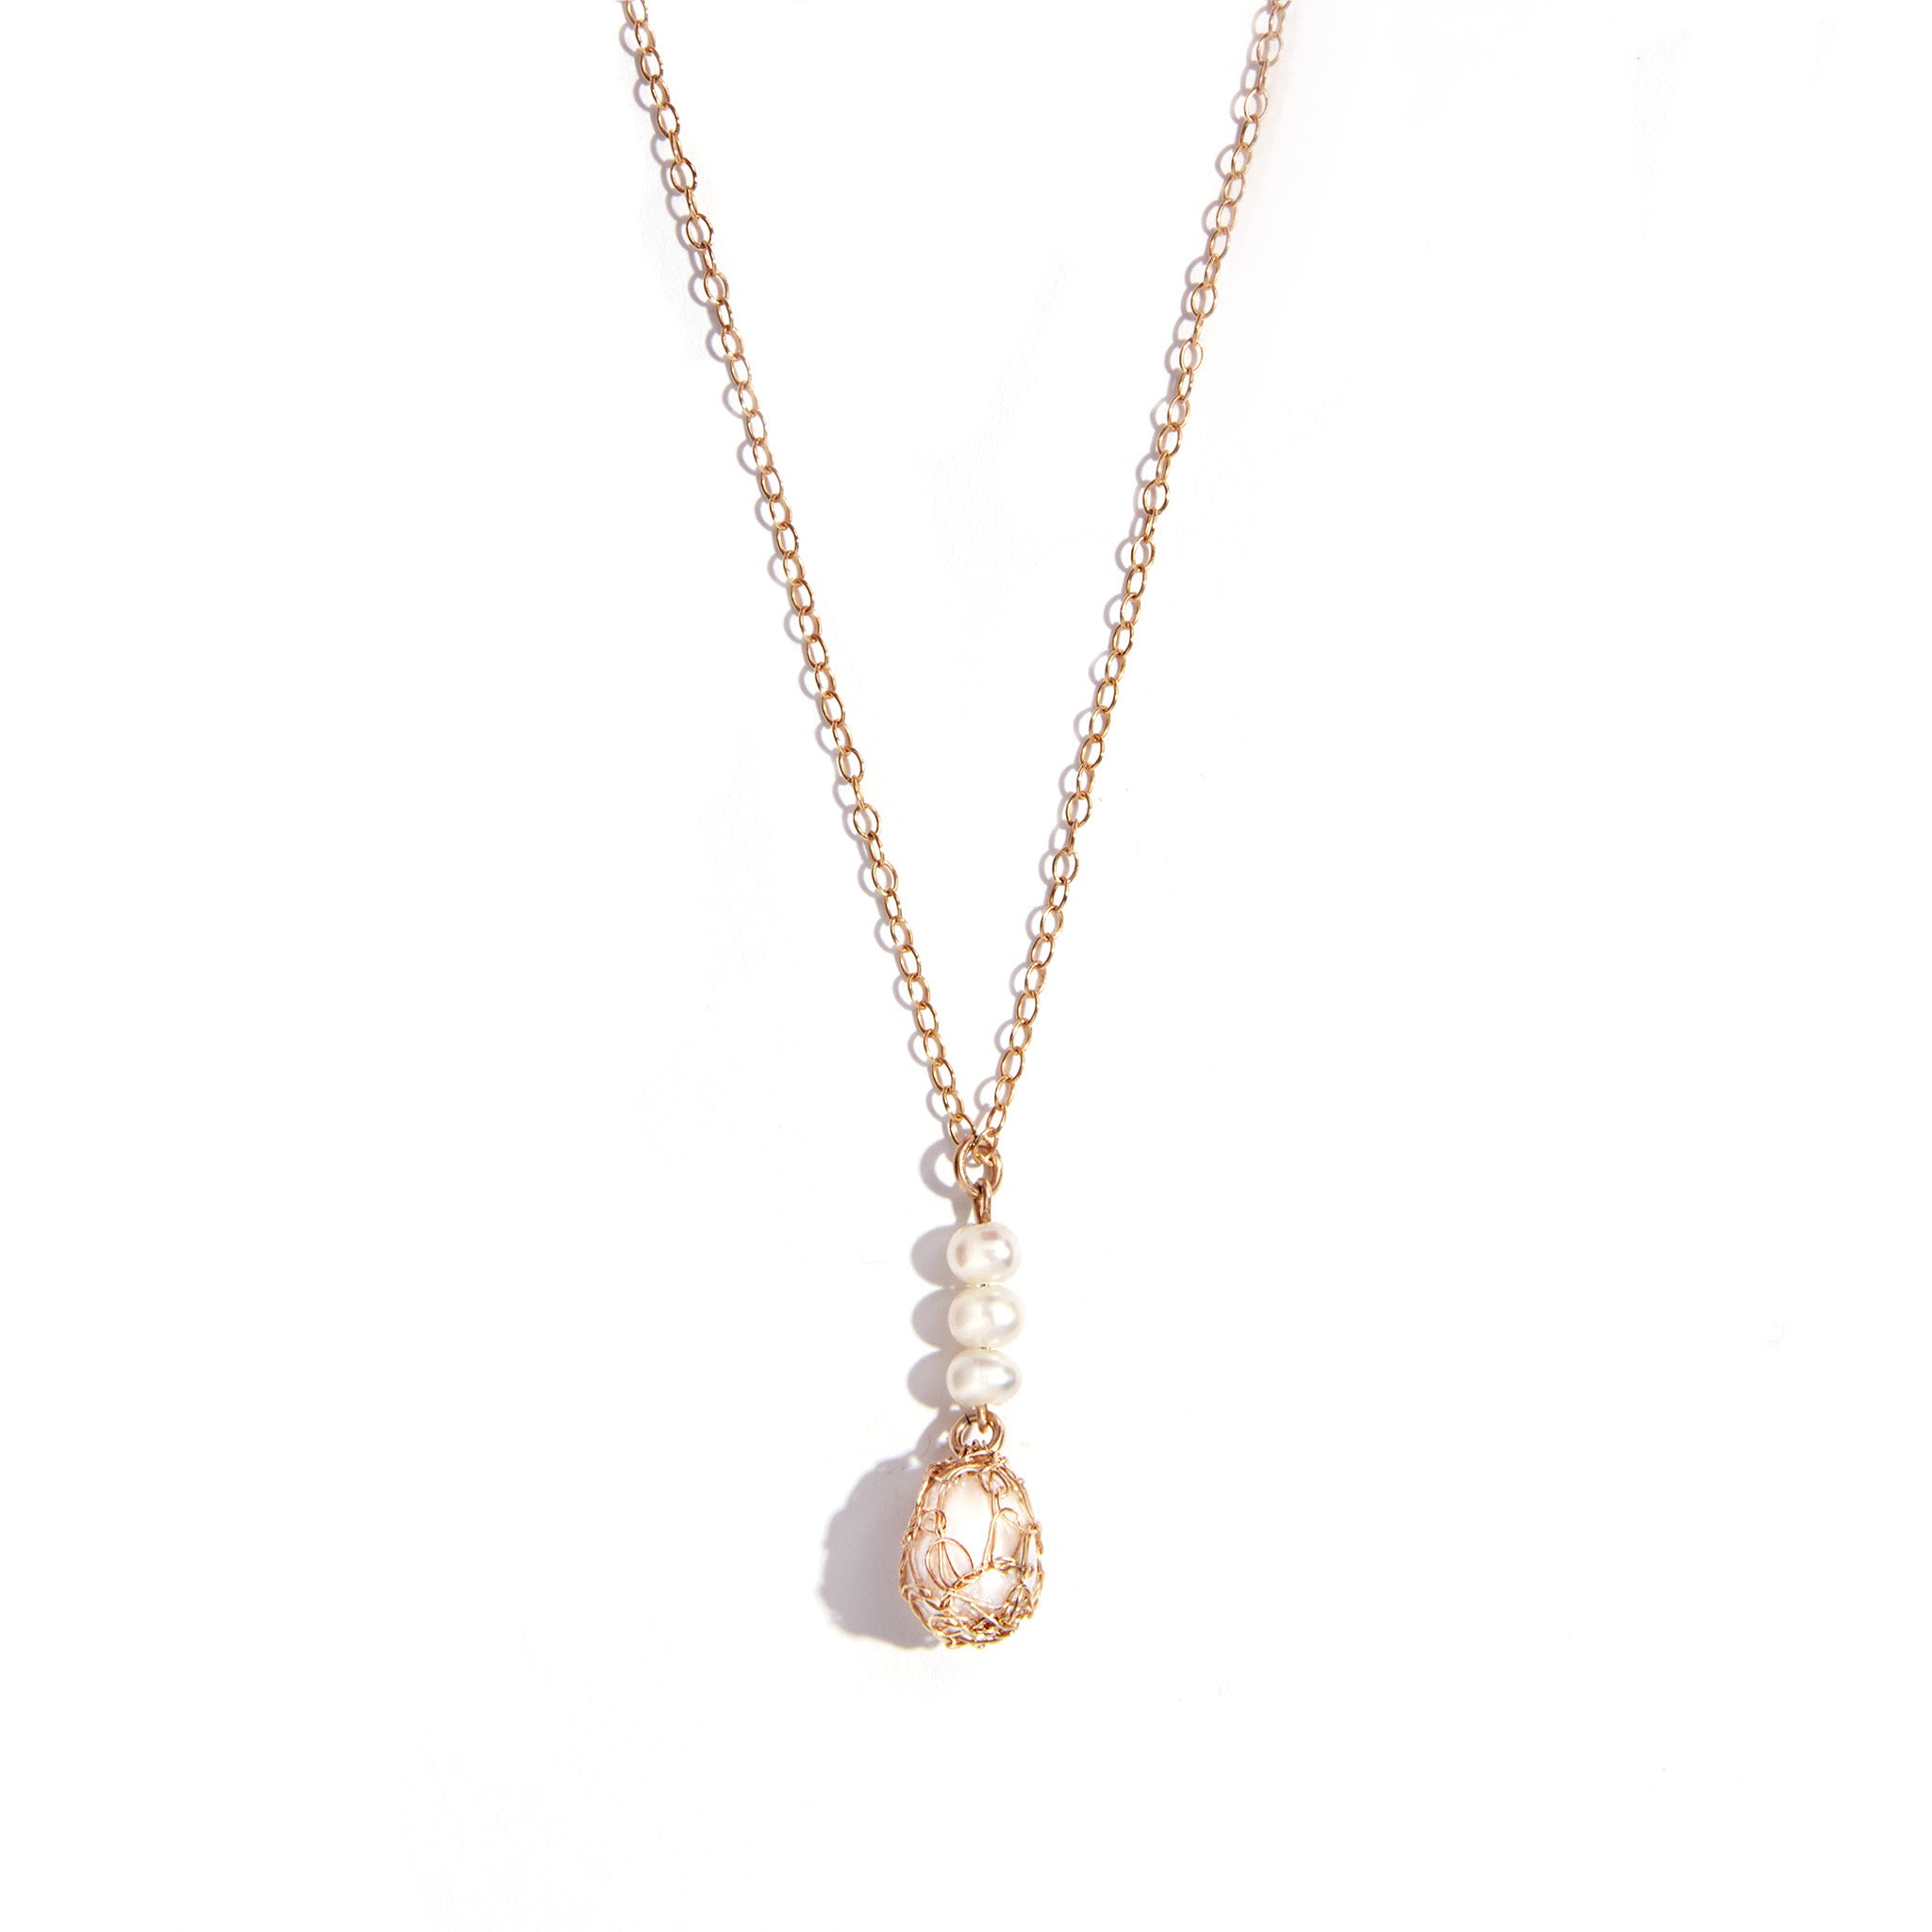 Elevate your style with the new four freshwater pearl crochet drop necklace crafted from luxurious 14 carat gold-fill. This stunning piece features delicate freshwater pearls intricately woven into a crochet chain, adding a touch of glamour and sophistication to any outfit.